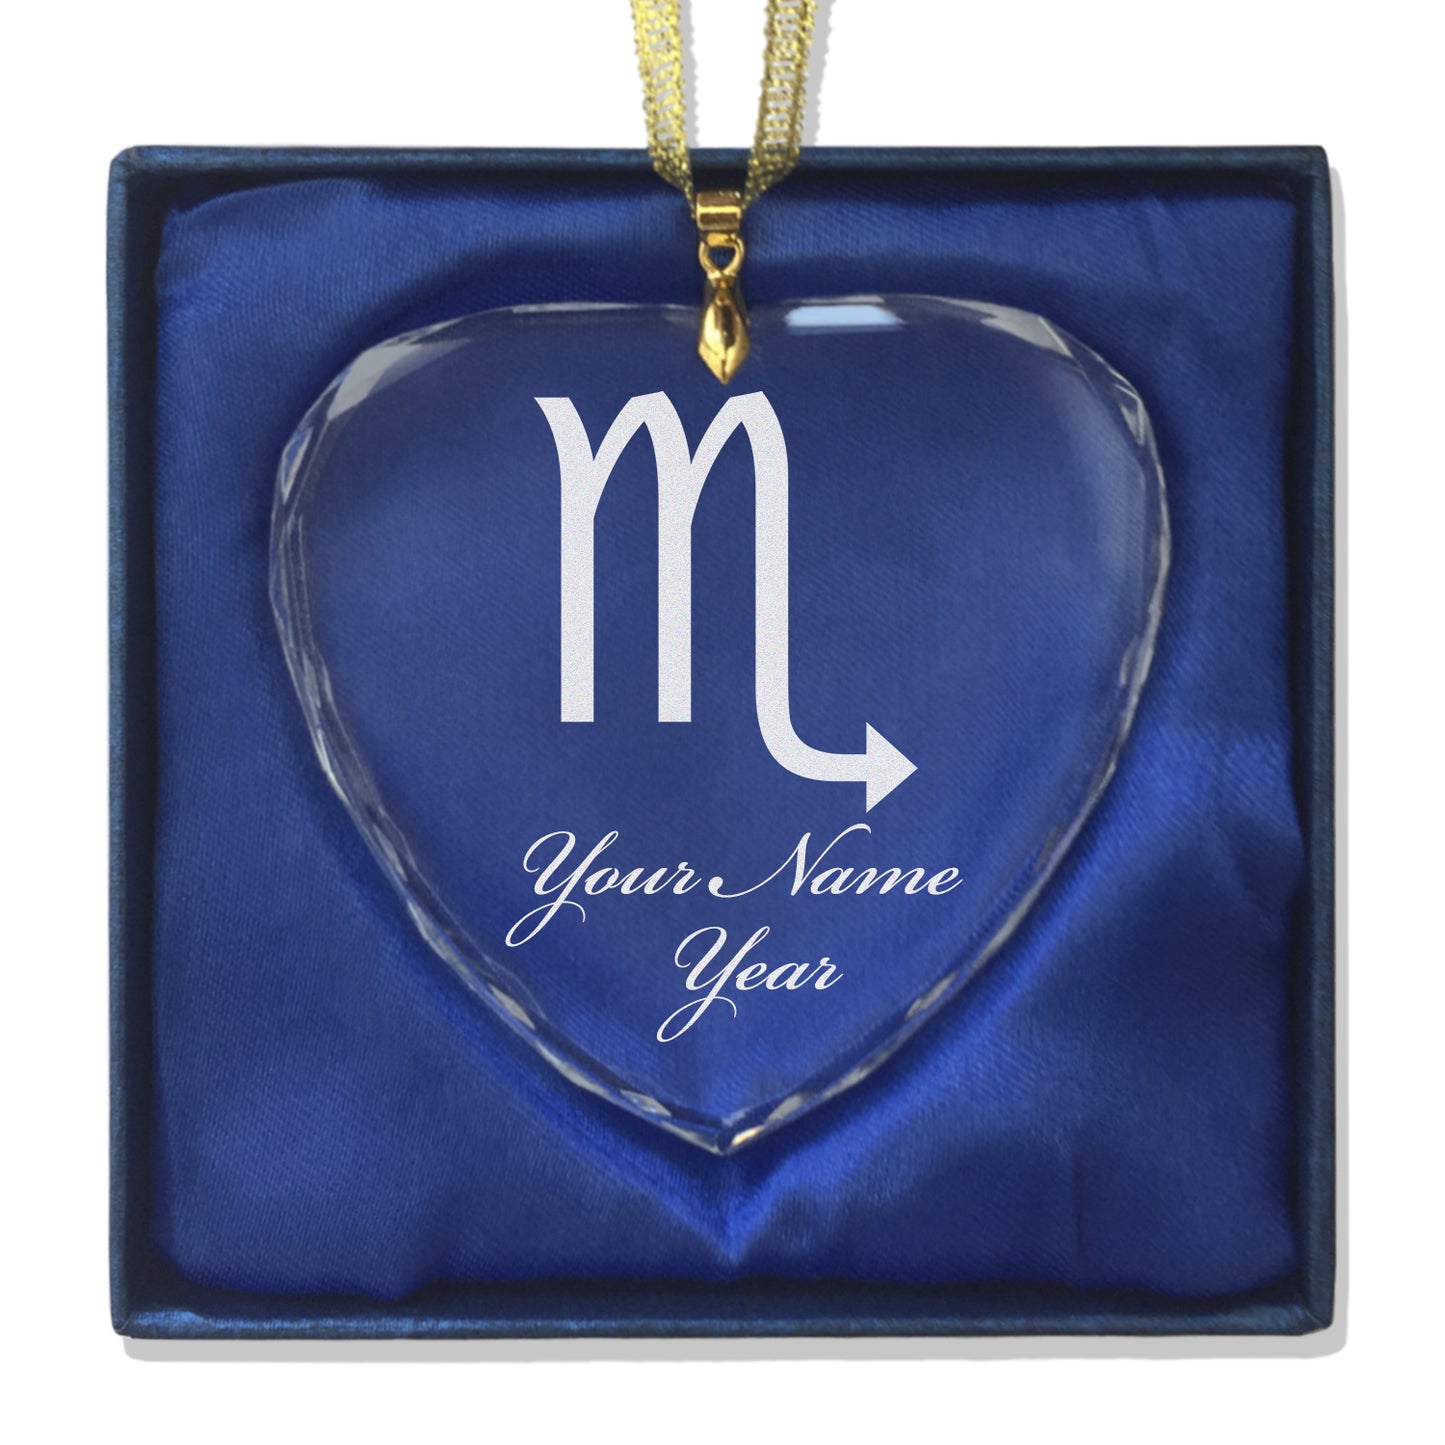 LaserGram Christmas Ornament, Zodiac Sign Scorpio, Personalized Engraving Included (Heart Shape)